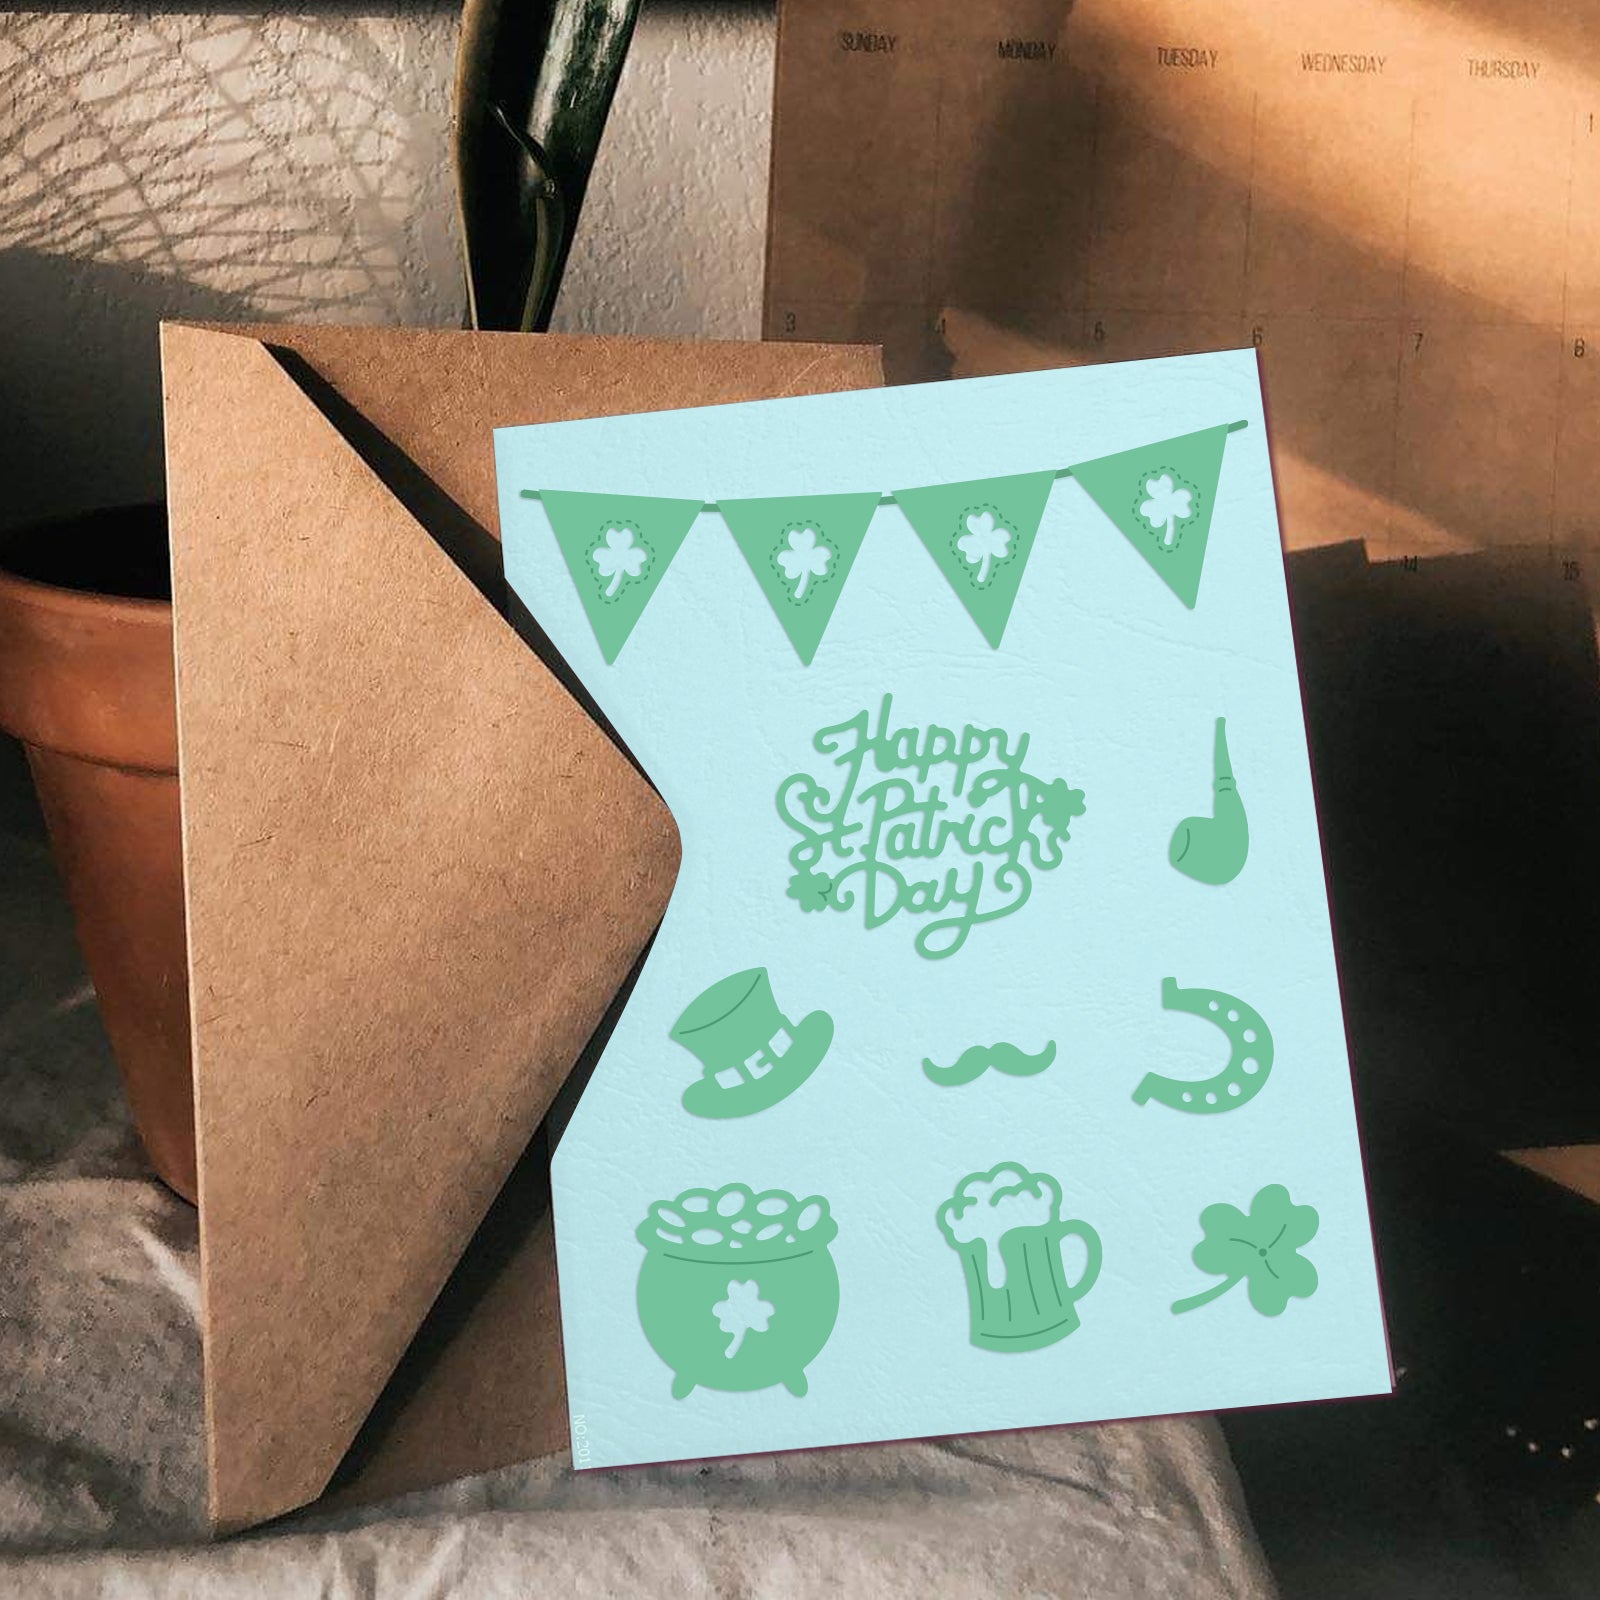 Globleland St. Patrick's Day, Clover, Hat, Flag, Beer, Gold Coins Carbon Steel Cutting Dies Stencils, for DIY Scrapbooking/Photo Album, Decorative Embossing DIY Paper Card